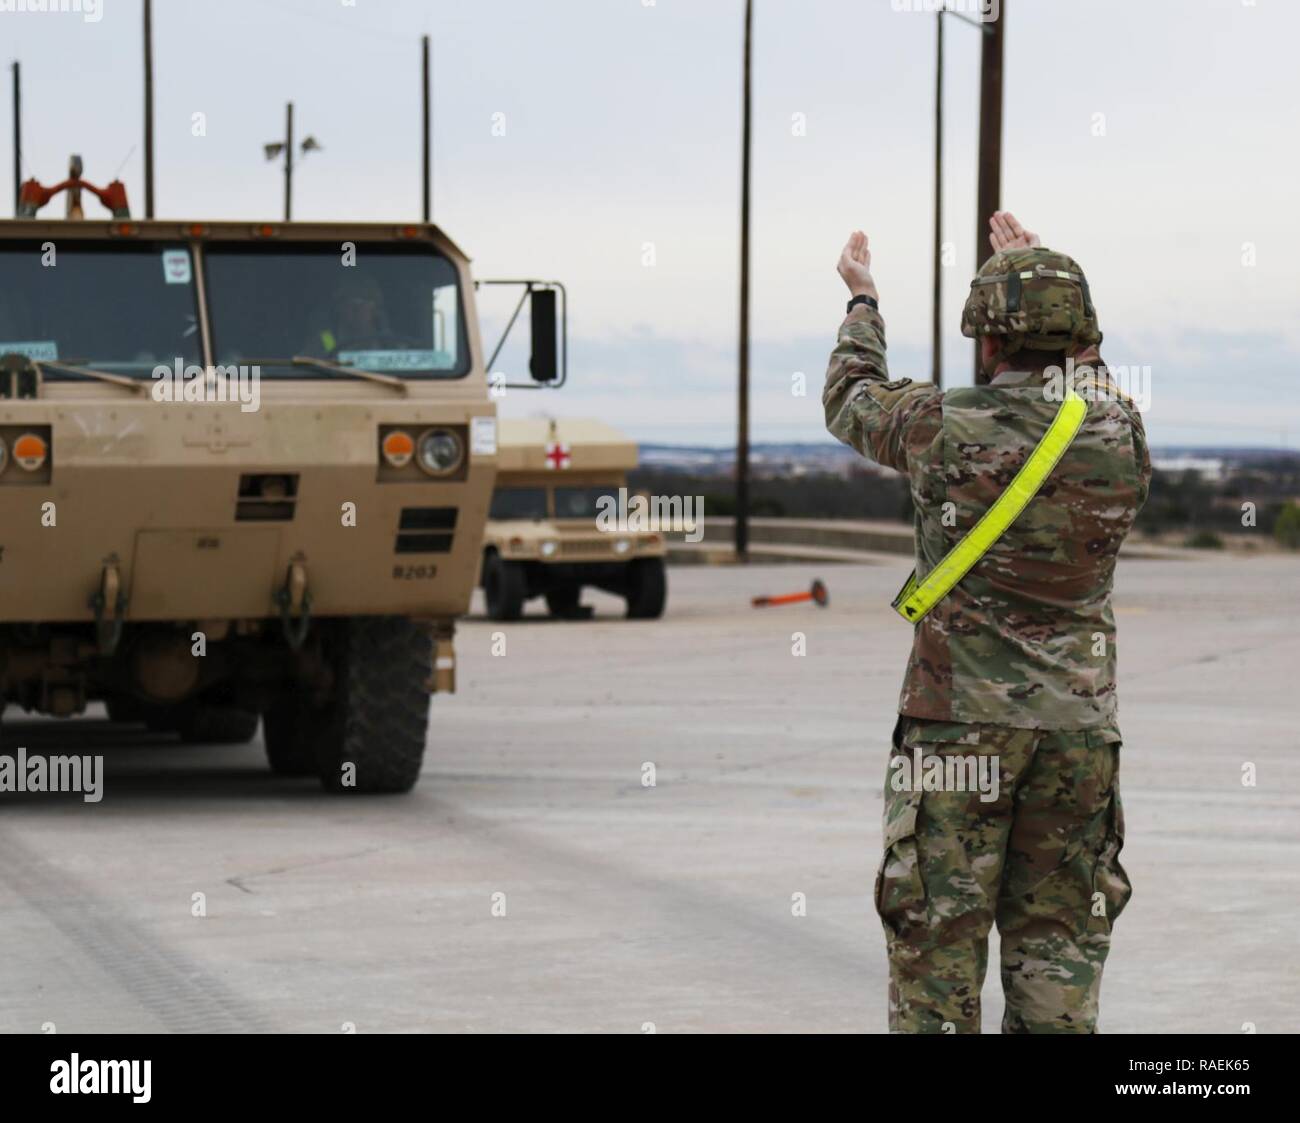 Sgt. Cody Christian, 62ned Expeditionary Signal Battalion, 11th Signal Brigade, guides a vehicle onto the rail, Dec. 12, 2018, Fort Hood, Texas. Soldiers were prepping vehicles for movement to another location. Stock Photo